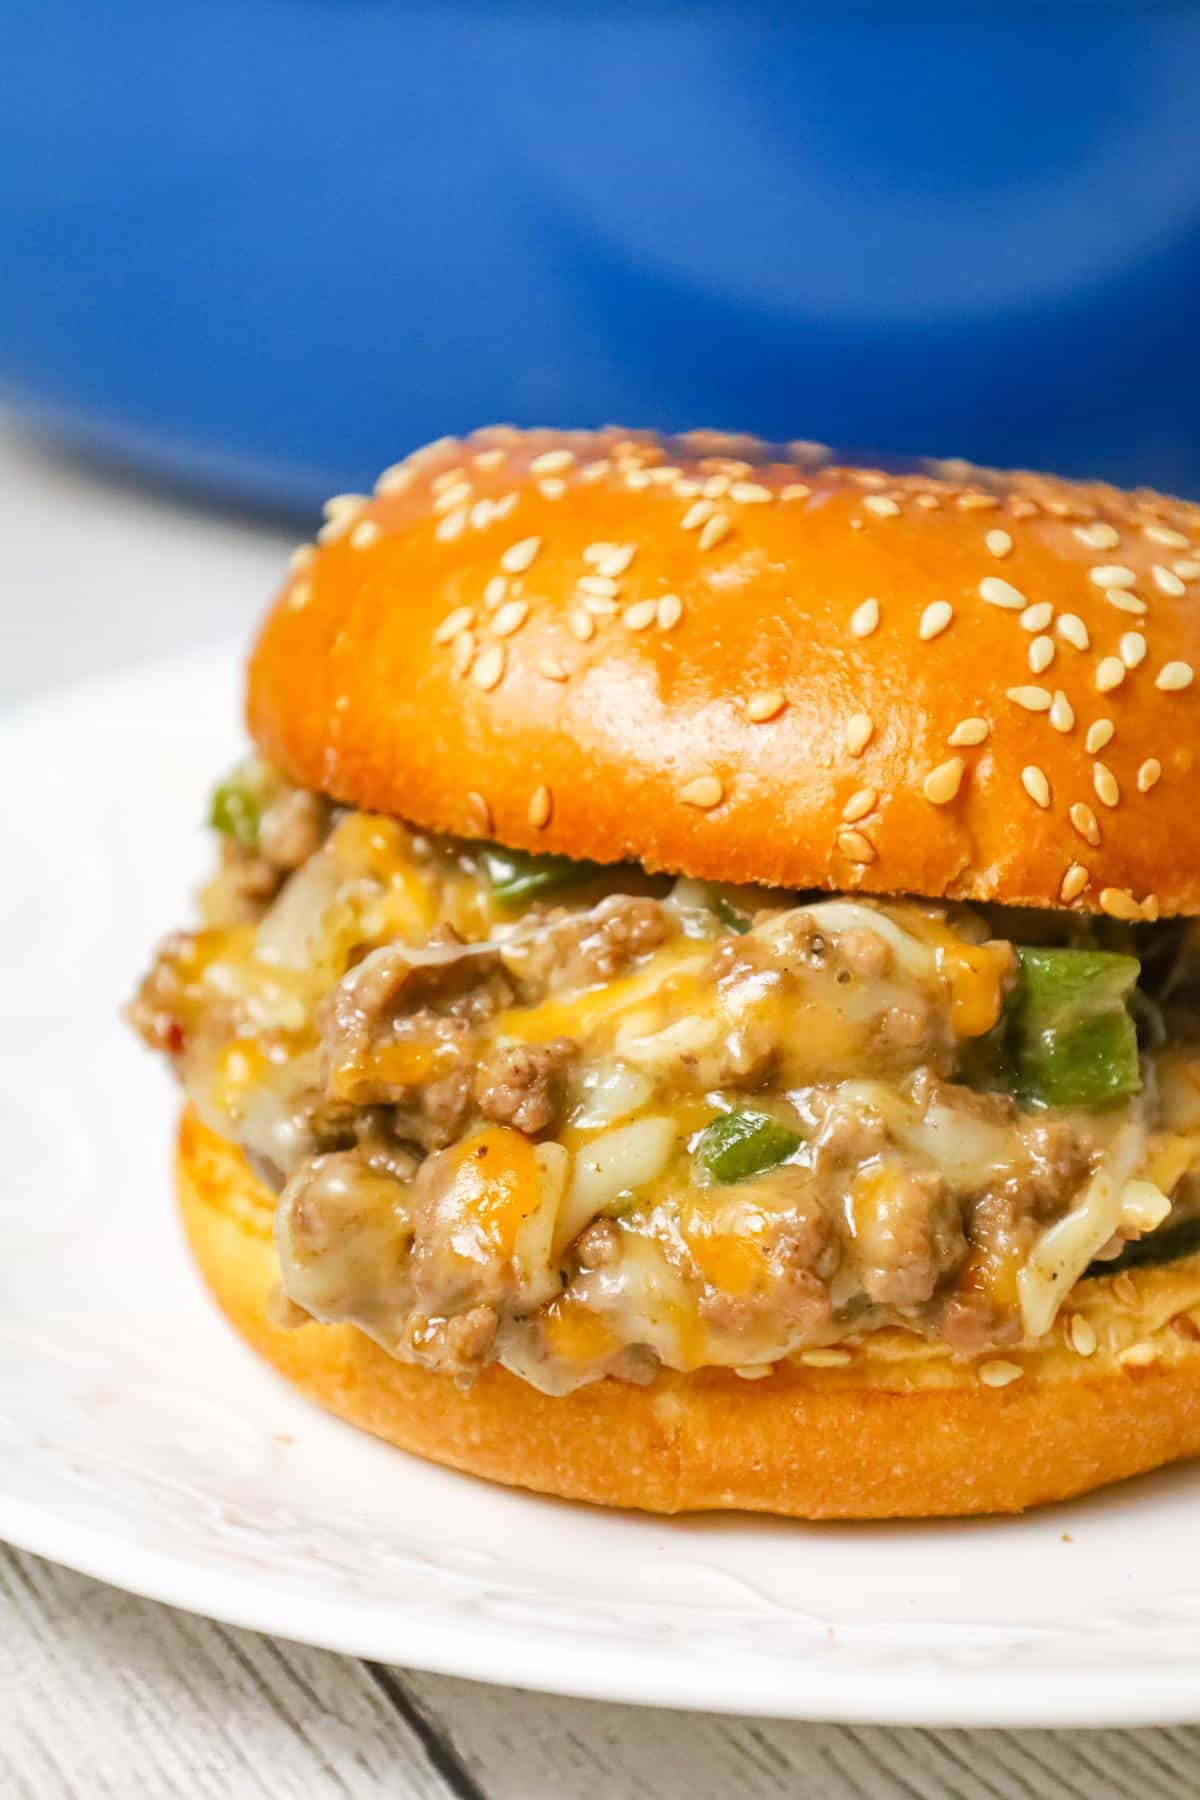 Philly Cheese Steak Sloppy Joes are an weeknight dinner recipe using ground beef loaded with green peppers, onions and shredded cheese all served on toasted Brioche buns.